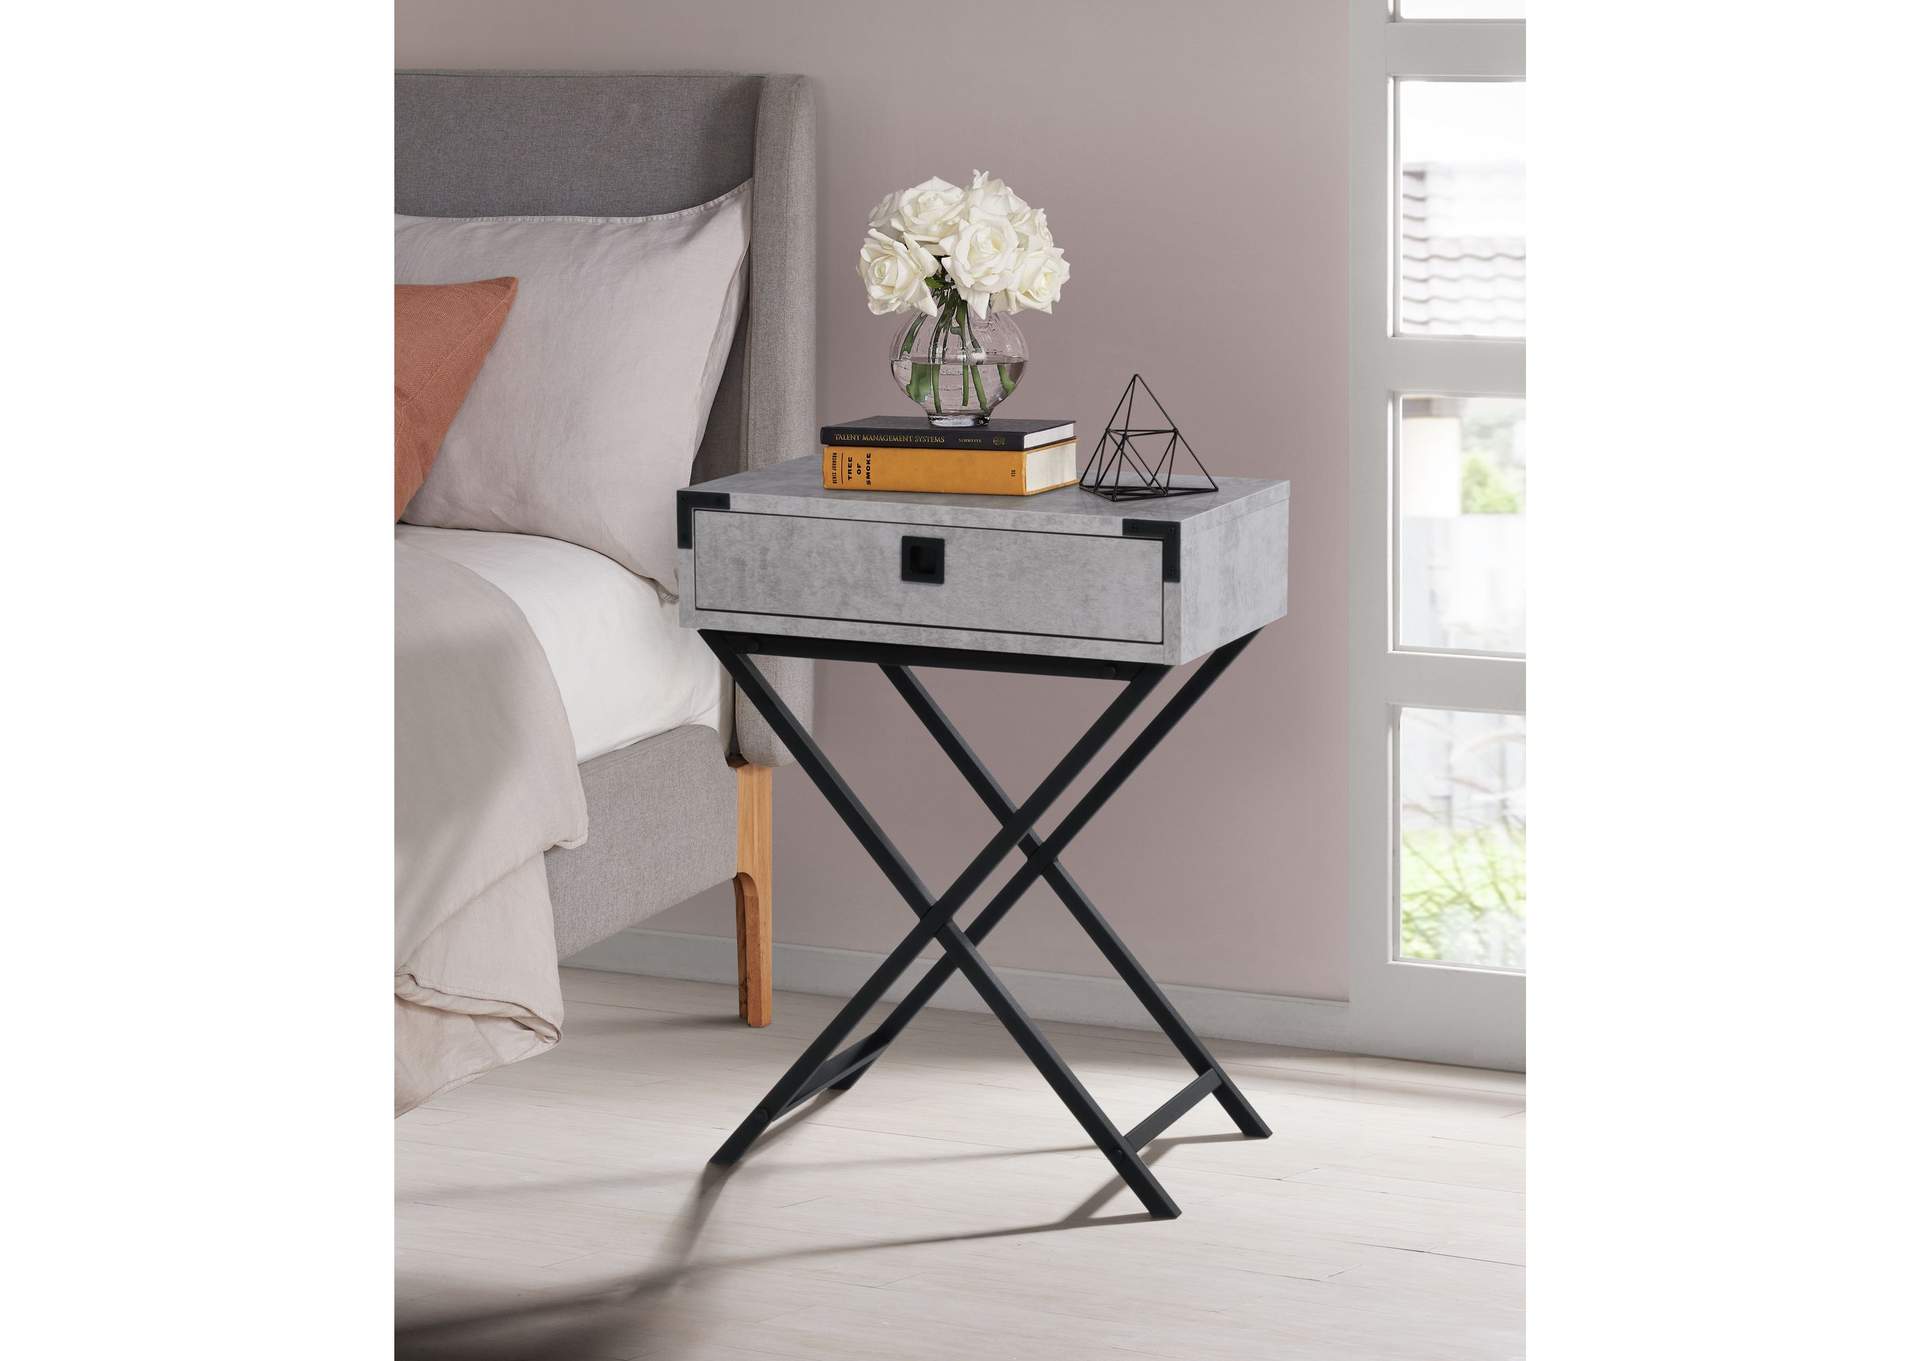 Lainey Accent Nightstand With Cement Top In Black,Elements